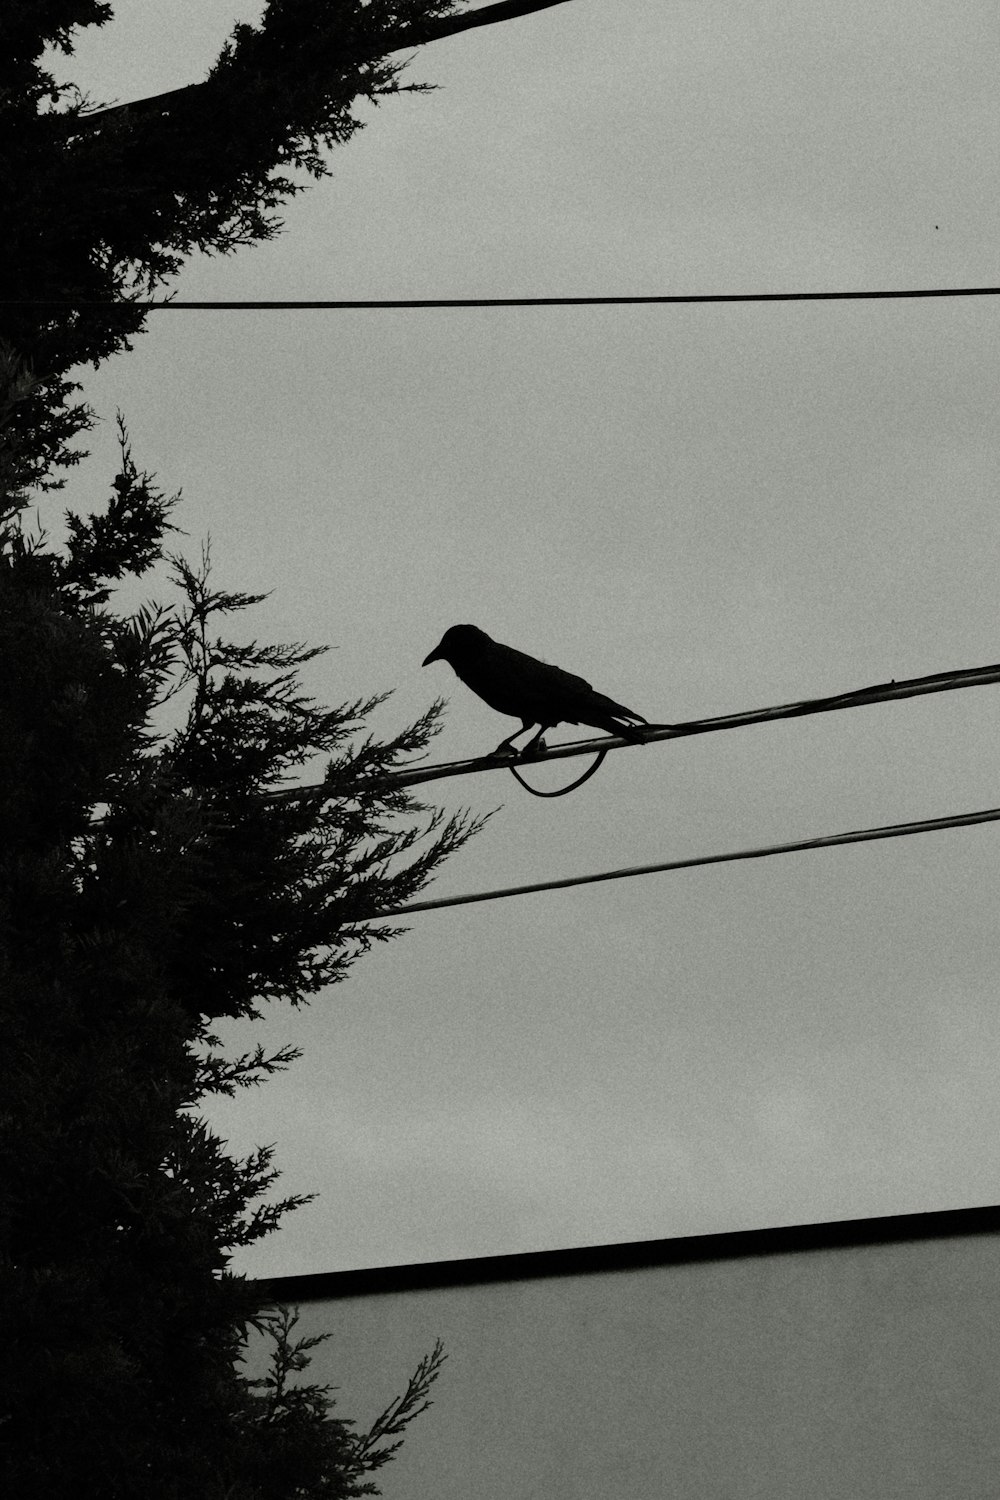 a black and white photo of a bird on a wire